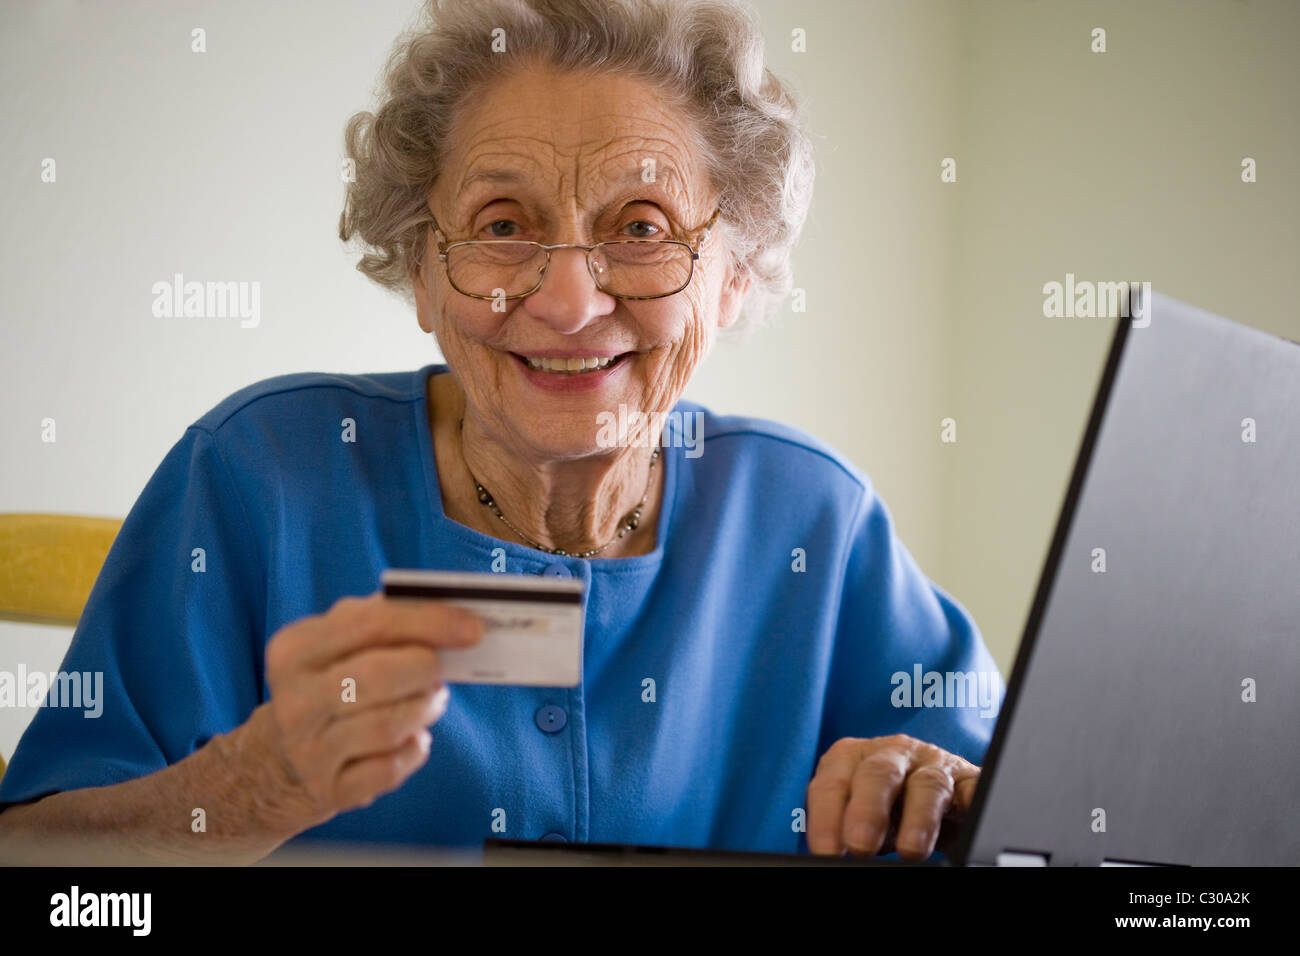 Smiling senior woman using credit card and laptop Stock Photo